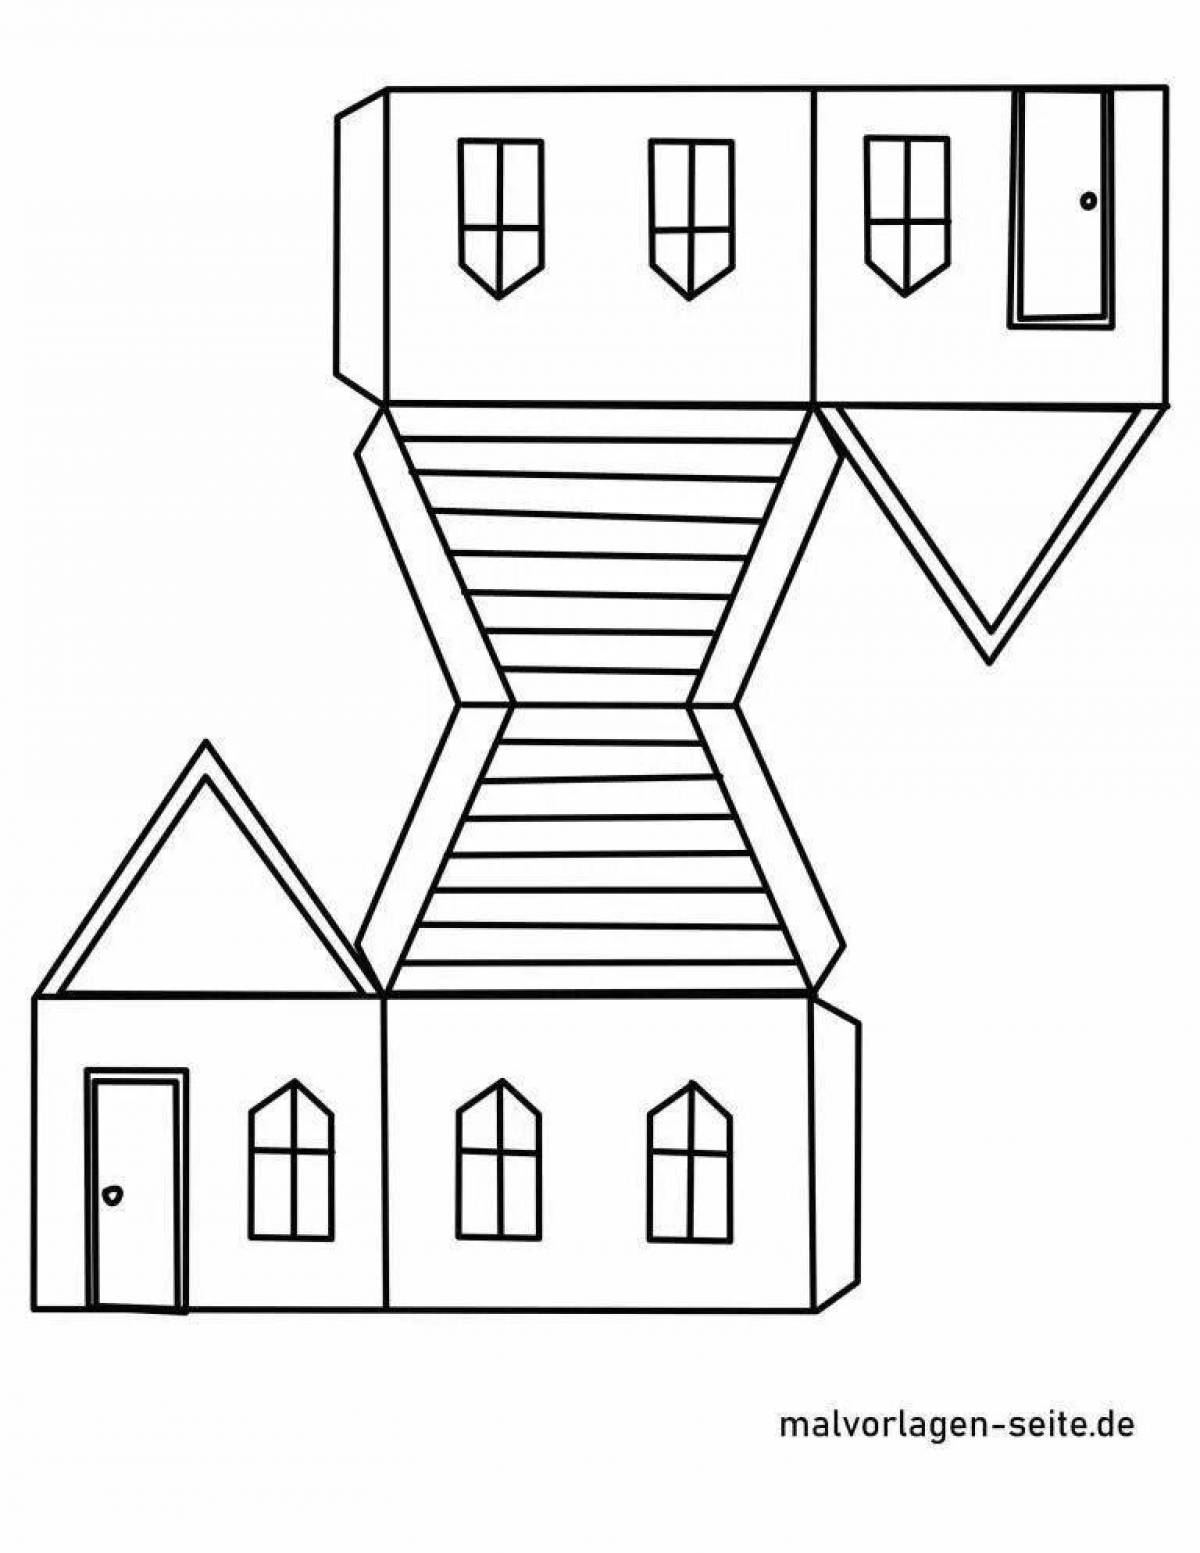 Amazing paper house coloring page